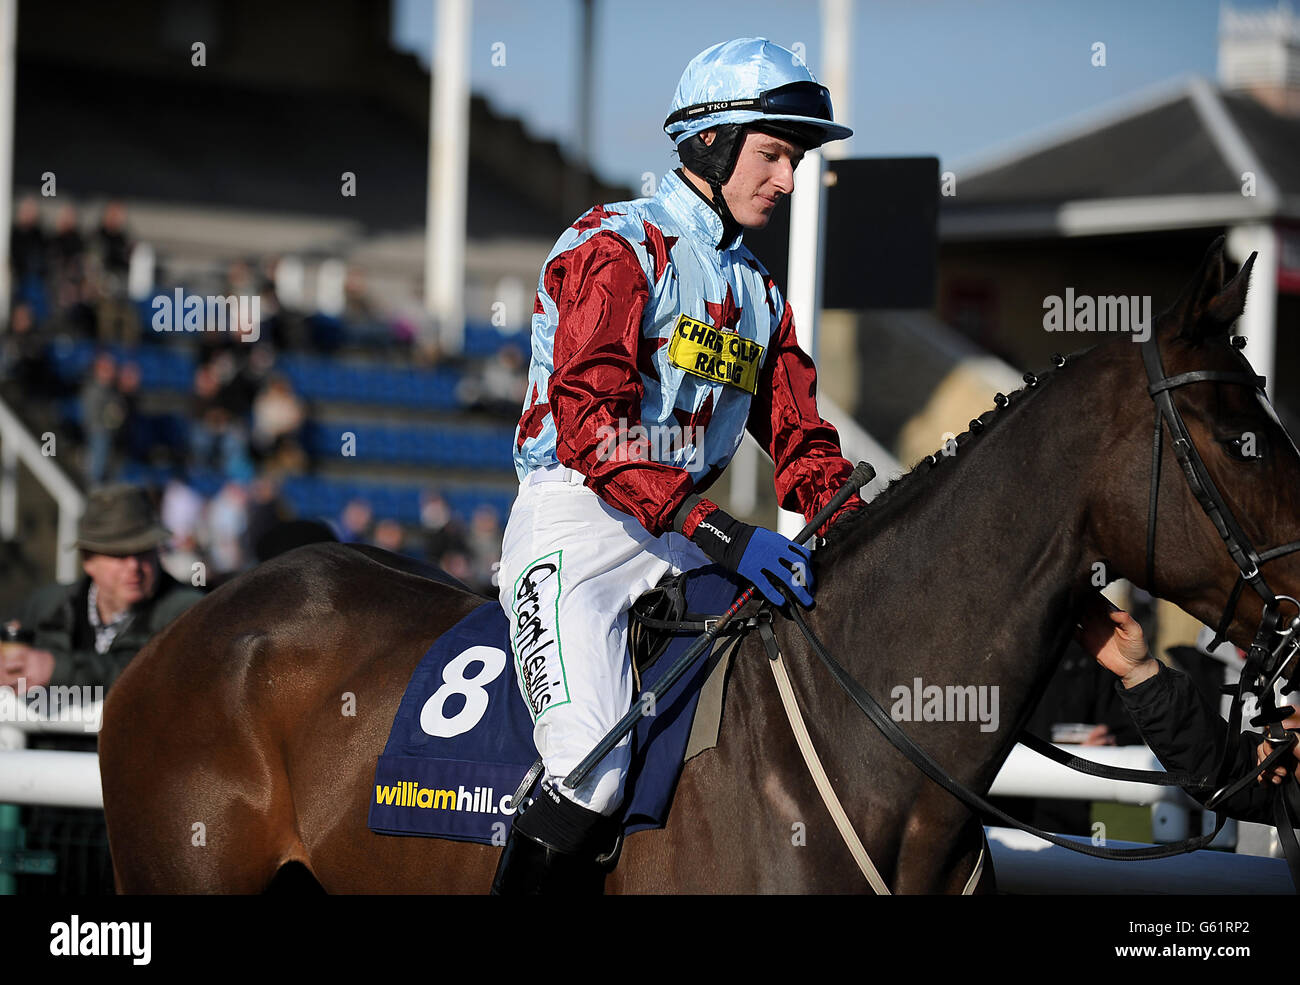 Horse Racing - William Hill Grimthorpe Chase Day - Doncaster Racecourse. Jockey Adam Wedge on Billie Magern before the William Hill Grimthorpe Chase Stock Photo